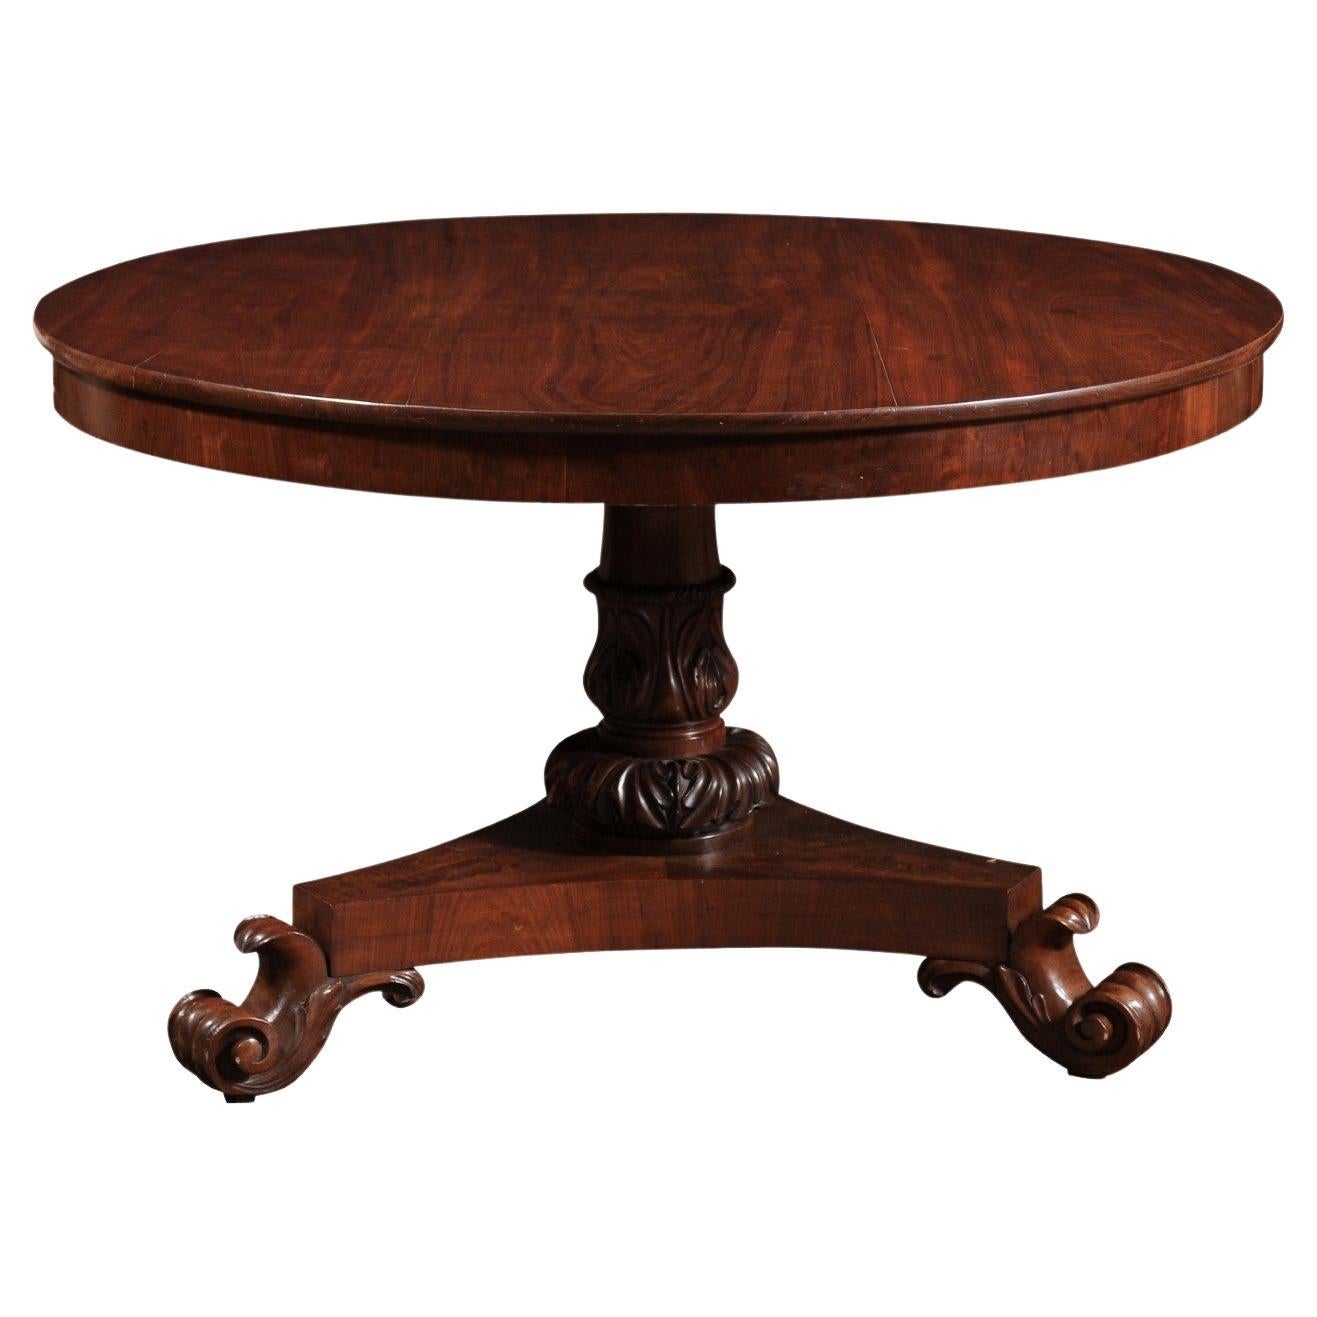  19th Century English Mahogany Center Table with Pedestal Base & Scroll Feet For Sale